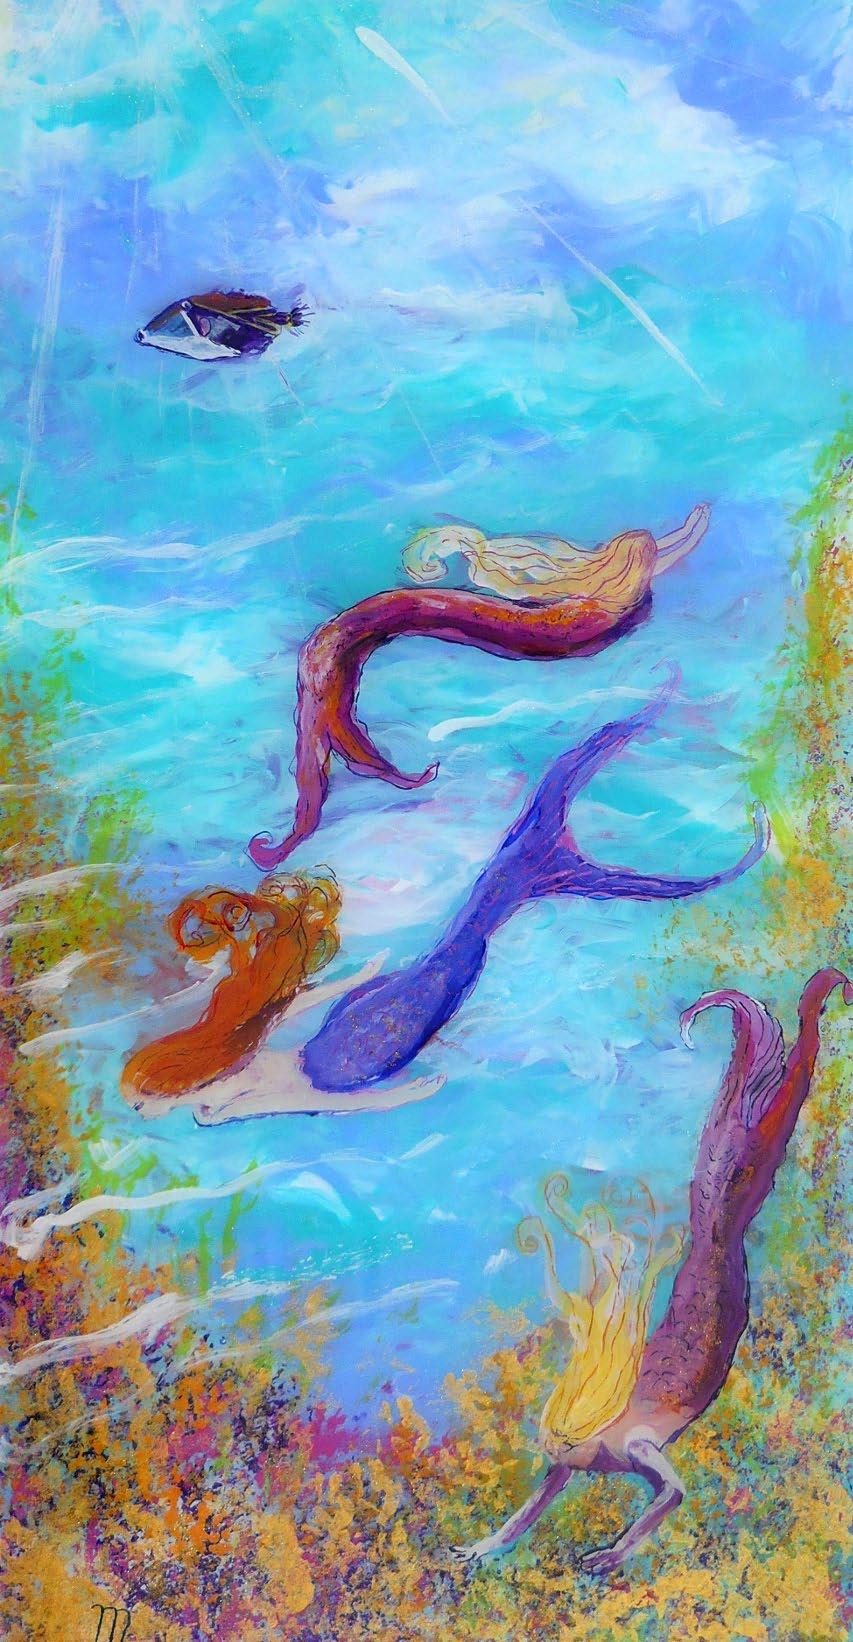 Mermaids, by Marionette Reverse acrylics on plexiglass, 12 x12 inches MT: I have found that in teaching art, you also teach people to relax and enjoy life.